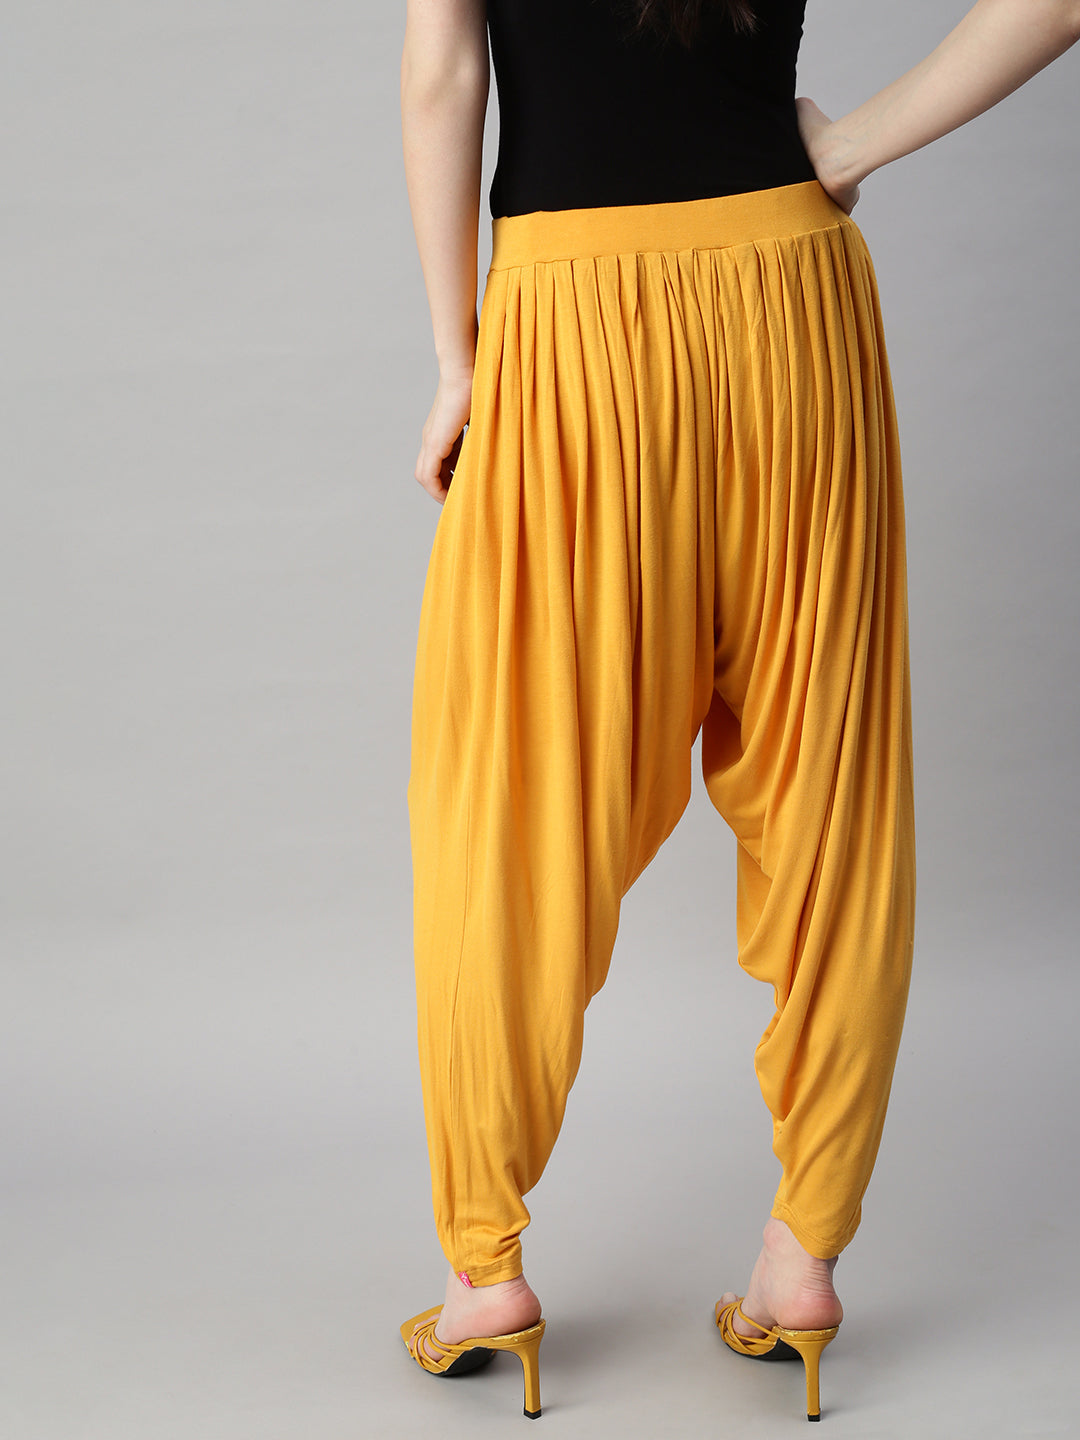 Shop the Latest Patiala-Mango Collection by Prisma